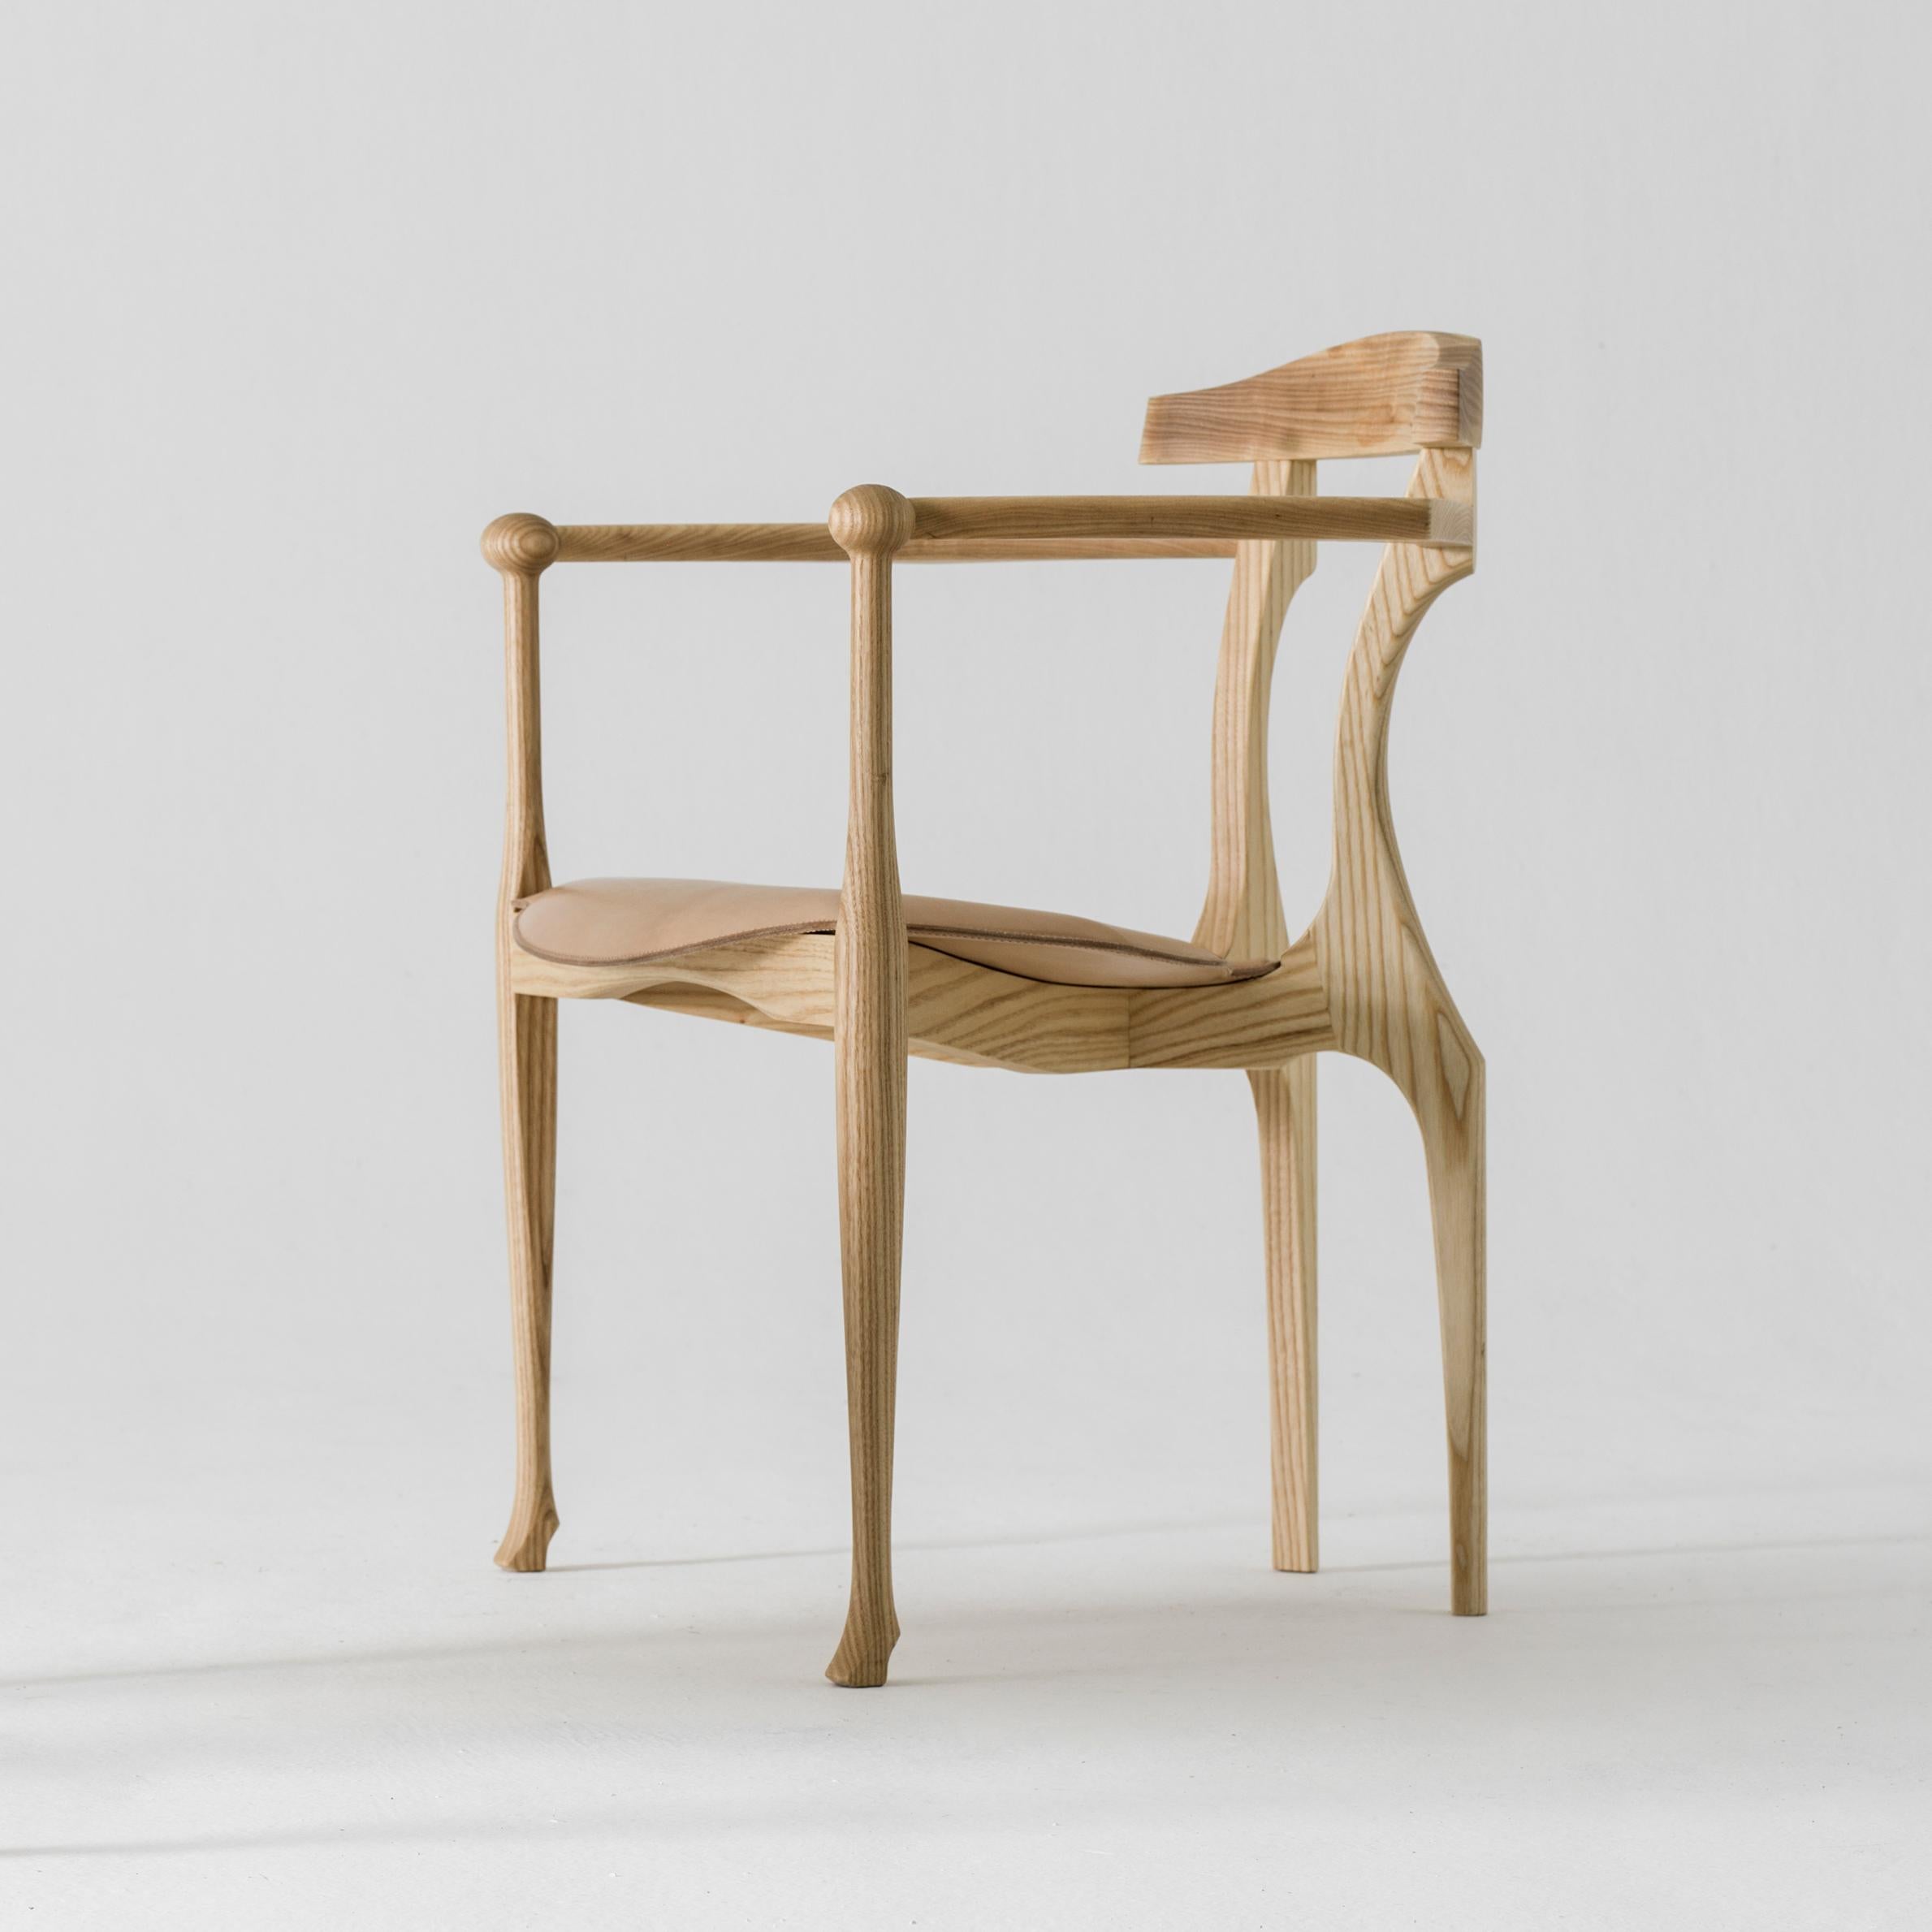 Gaulino easy chairs designed by Oscar Tusquets manufactured by BD Barcelona Design, circa 2010.

Solid natural varnished ash with seat in natural hide


Gaulino chair which, designed in 1987, was selected for the Industrial Design Prize and